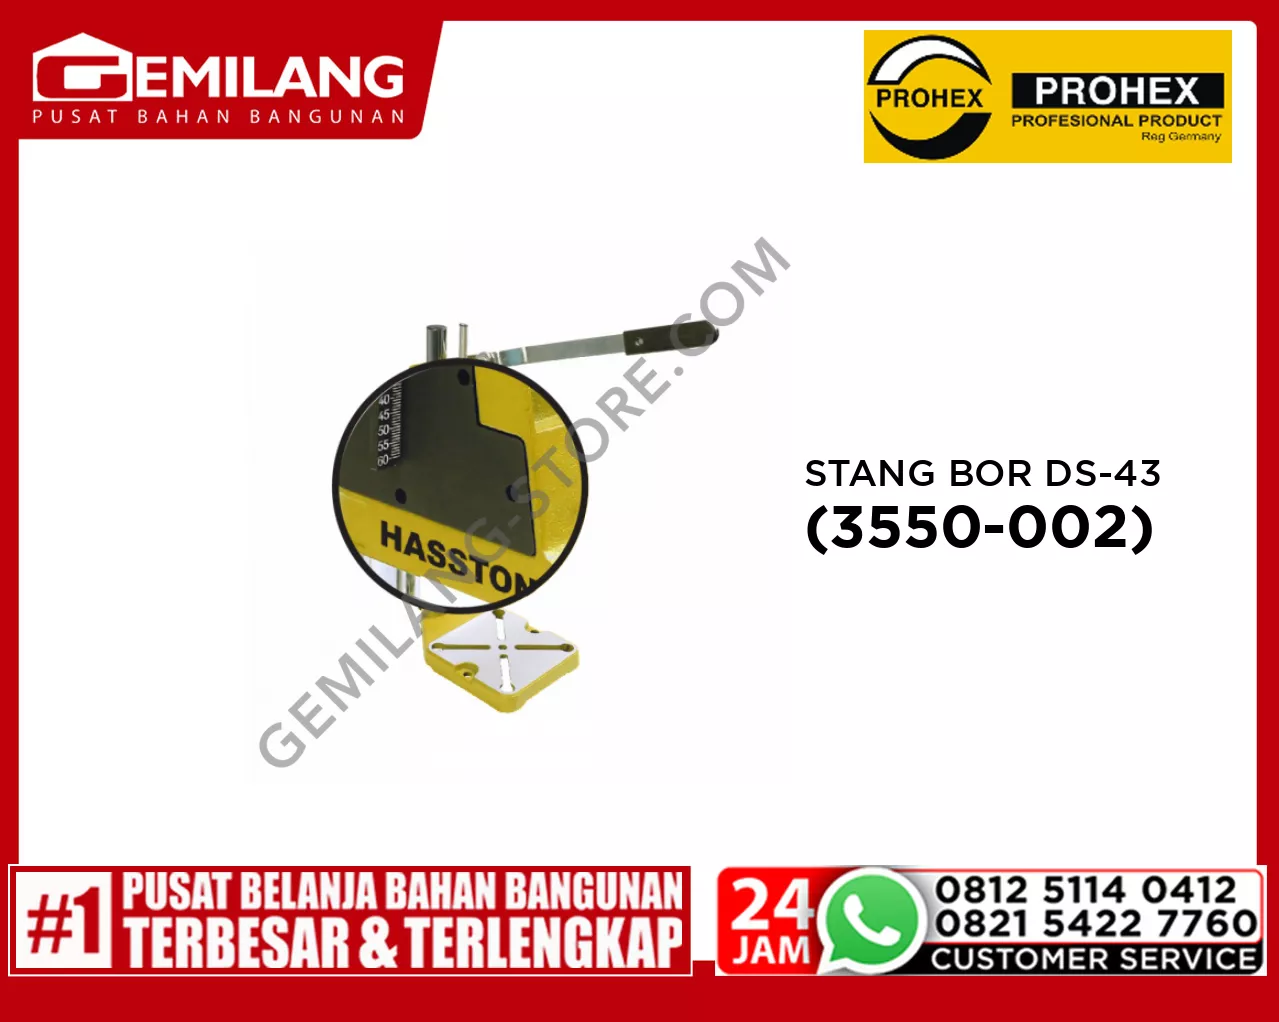 PROHEX STANG BOR DS-43 (3550-002)